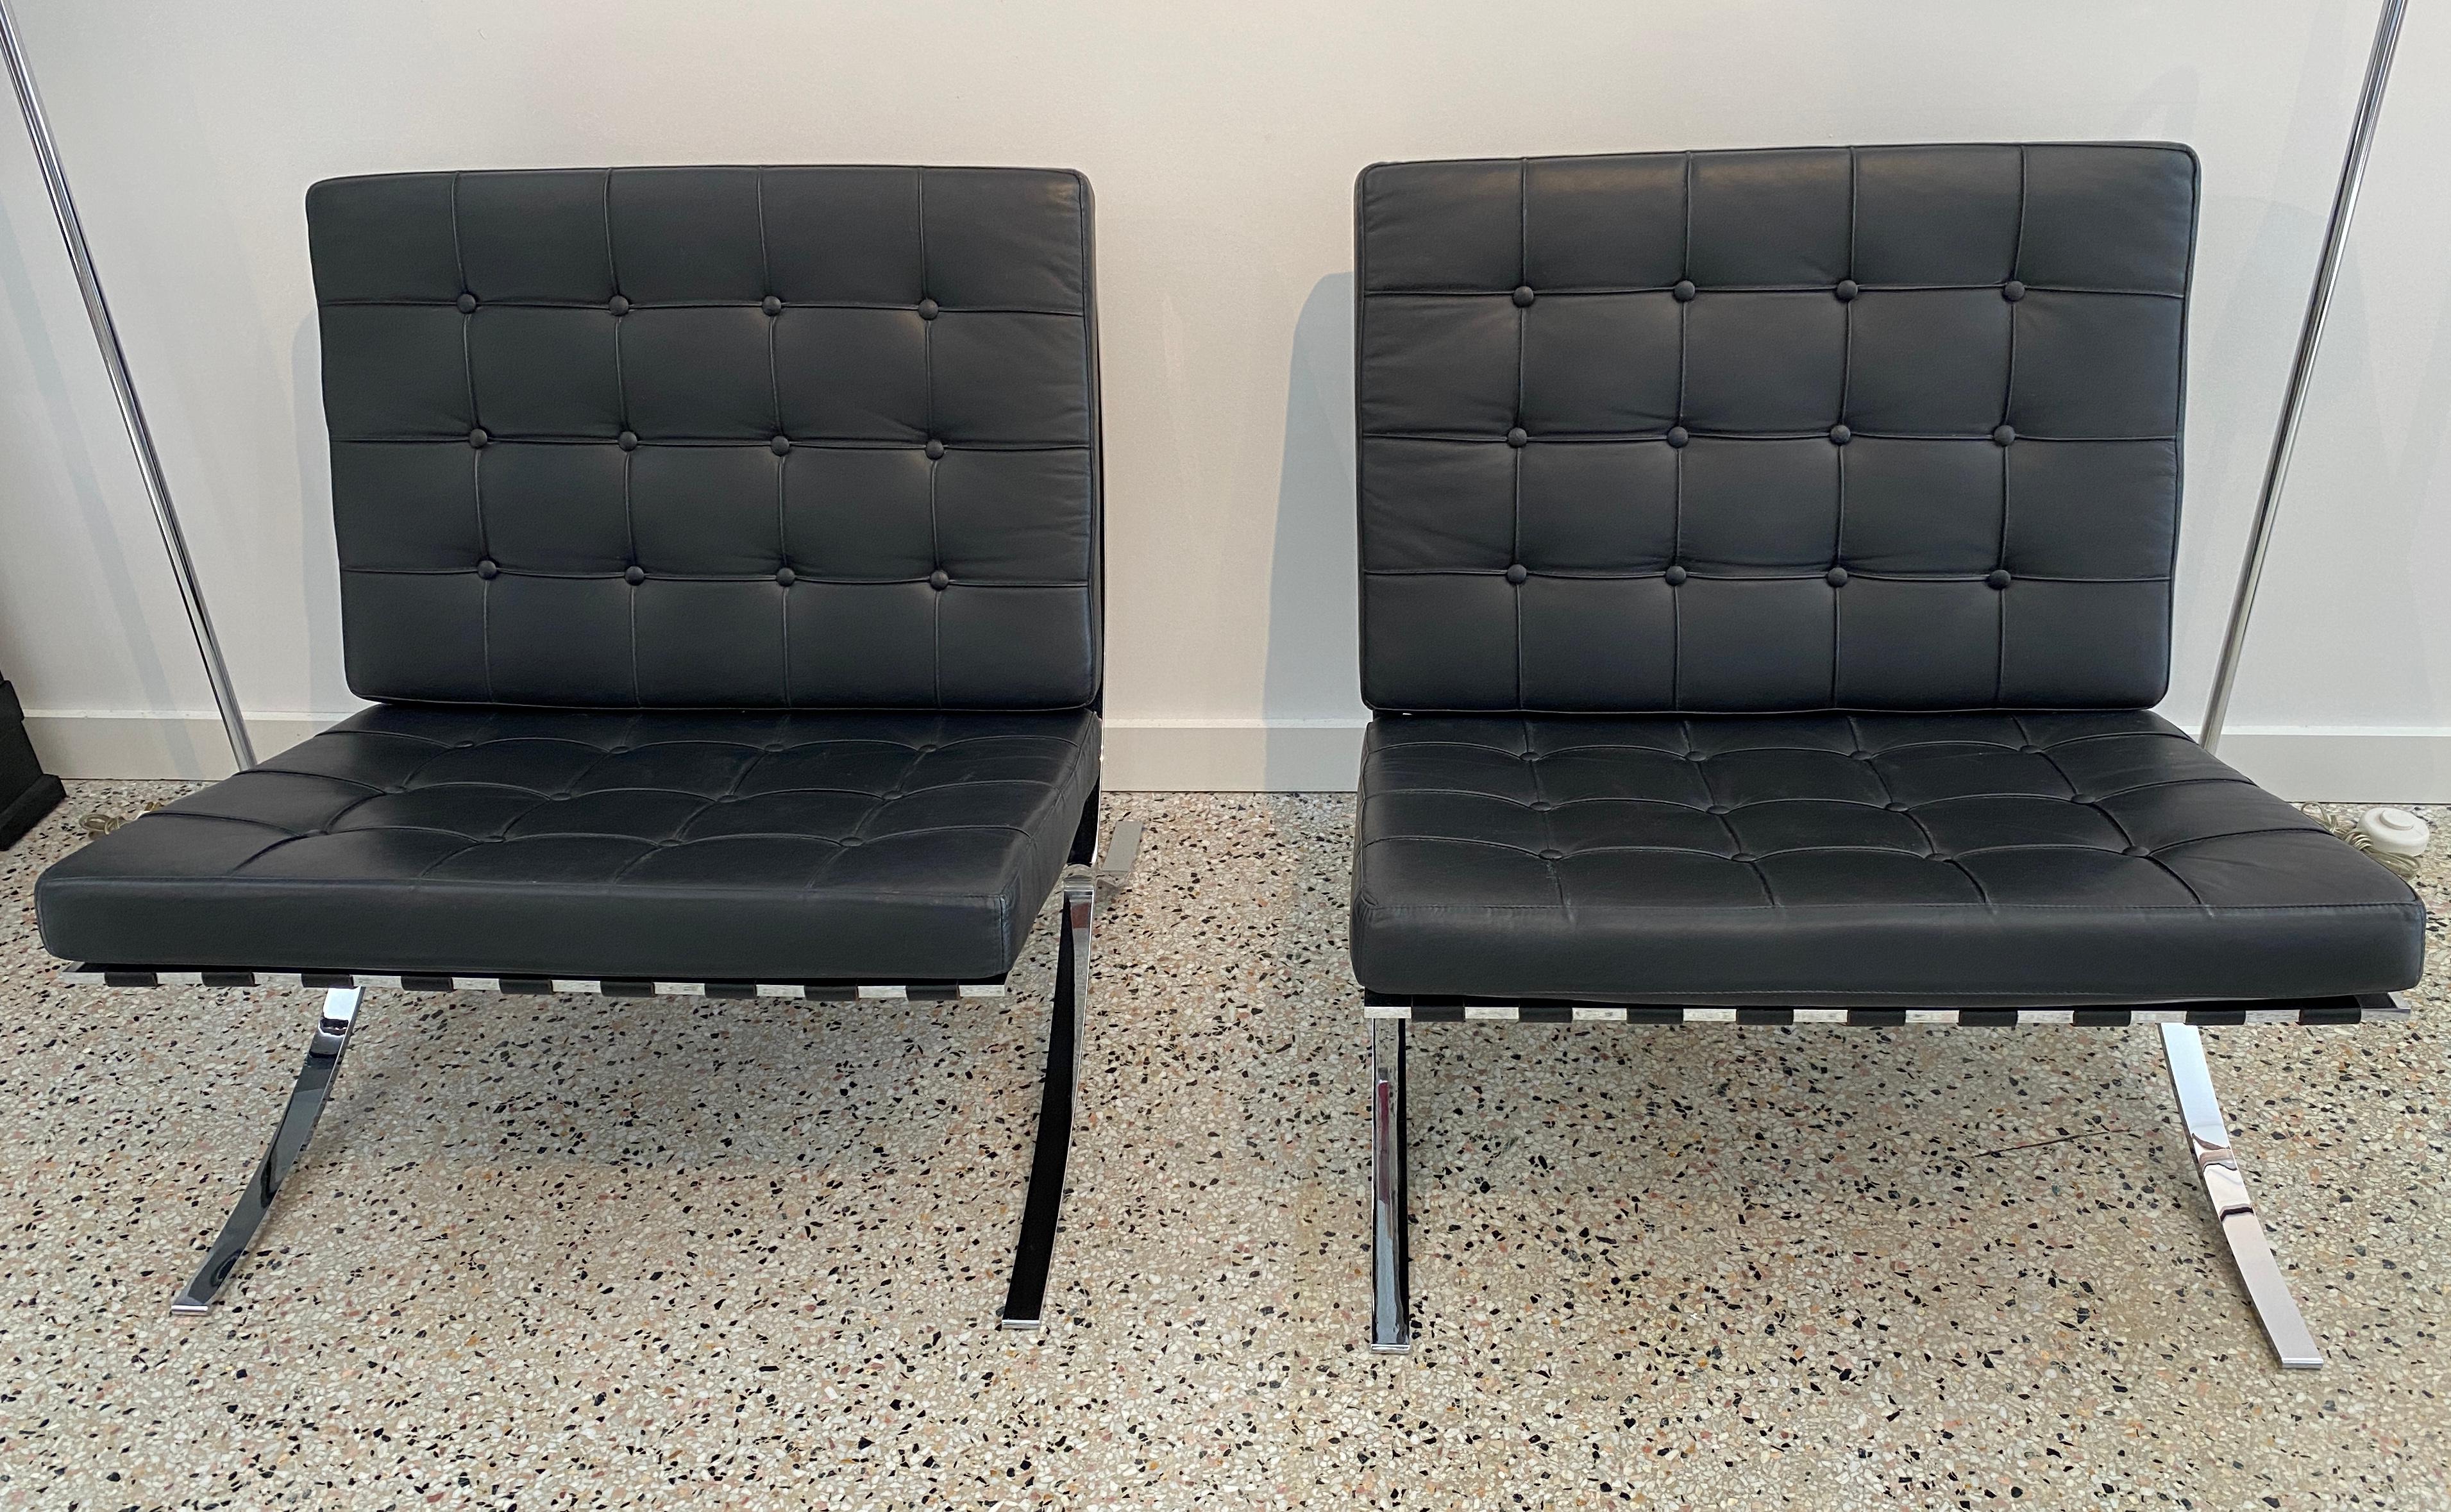 This stylish pair of Barcelona style chairs date to the 1980s and were manufactured by Fascm International.  The pieces capture the true form and use of materials as the original Mies van der Rohe.

The frames are steel with a polished chrome